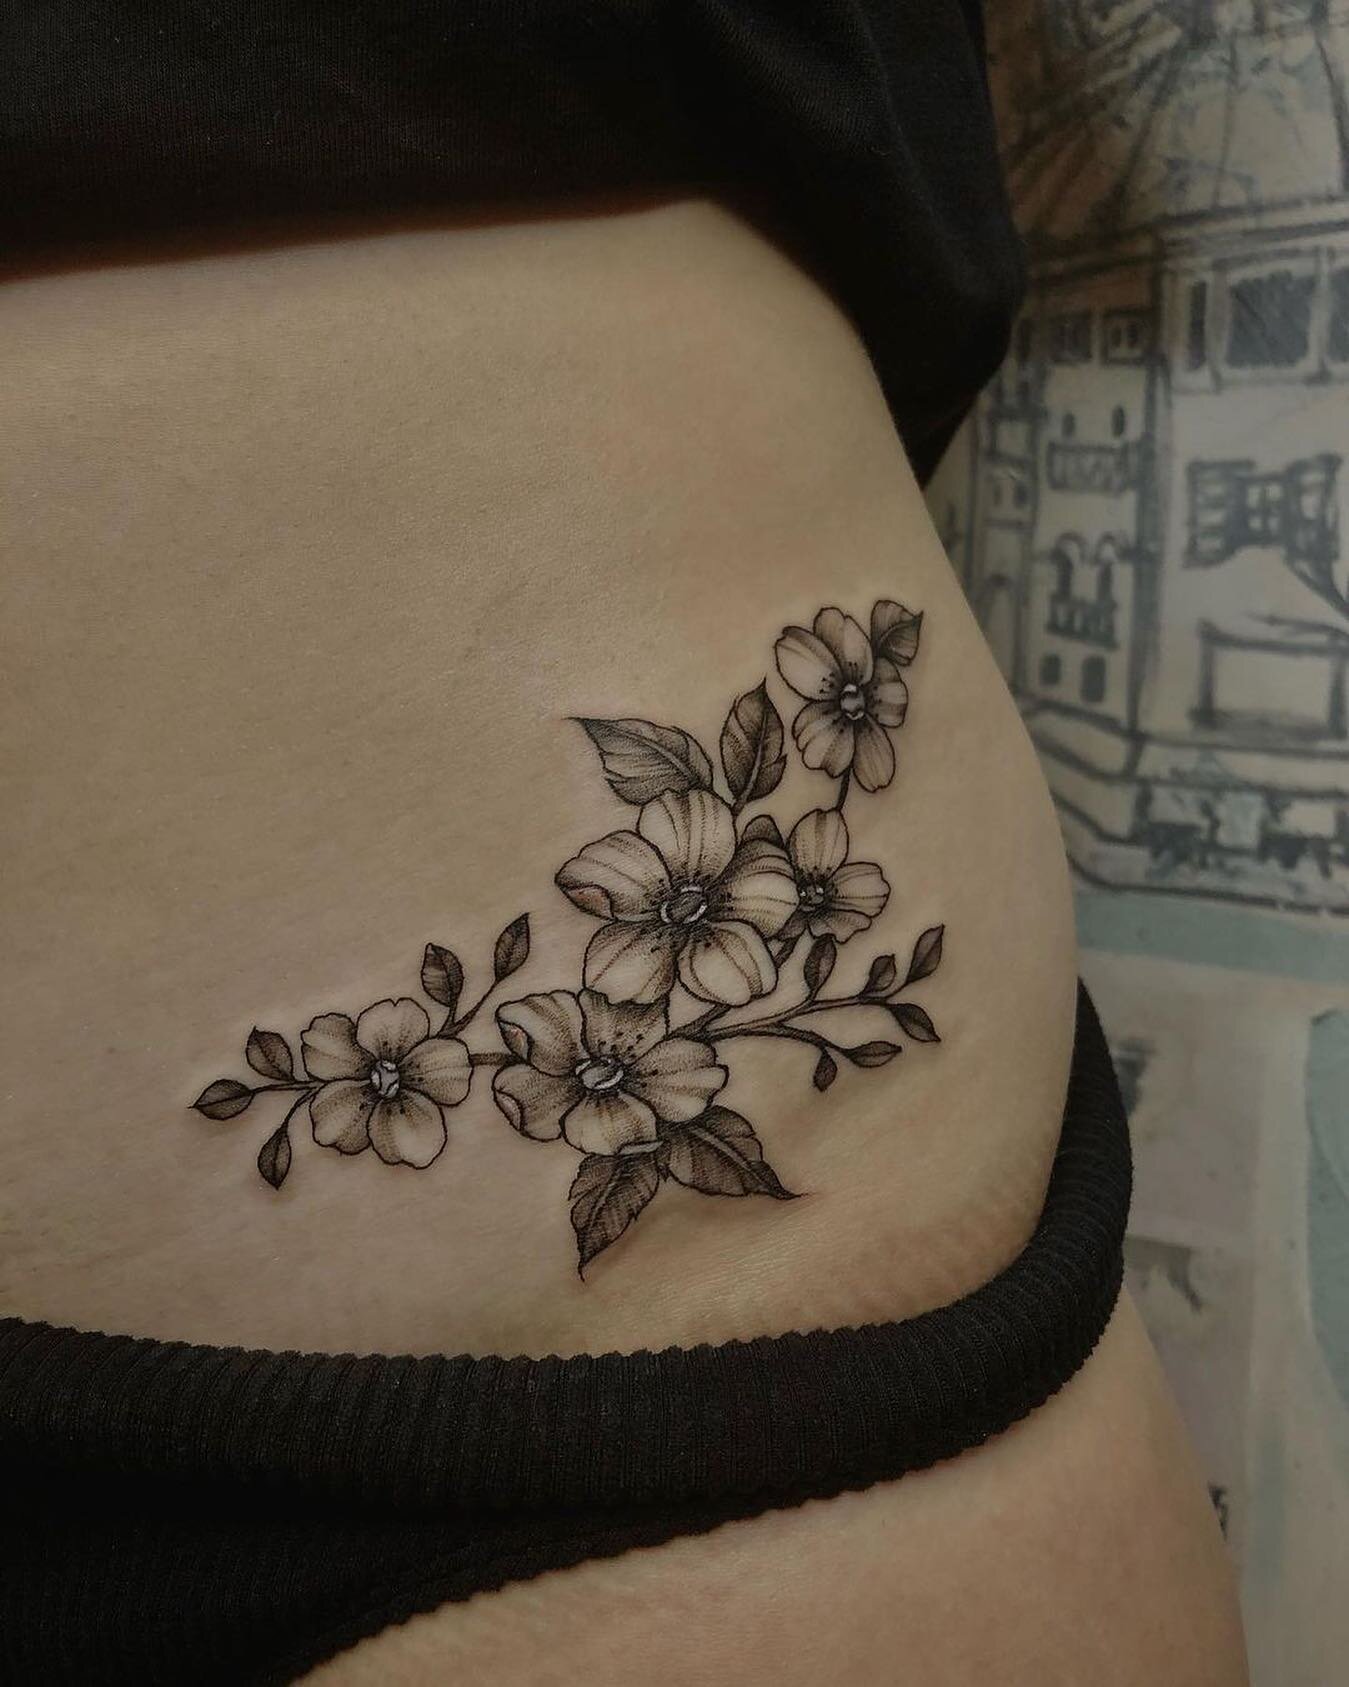 Beautiful floral tattoo and design by artist Emma. Her books are temporarily closed. Artwork and prints available for sale at Shoreline Tattoo ✌️ @emctattoos
-
-
-
-
#repost #njtattoo #njtattooartist #njtattooshop #littleeggharbor #mysticisland #lbi 